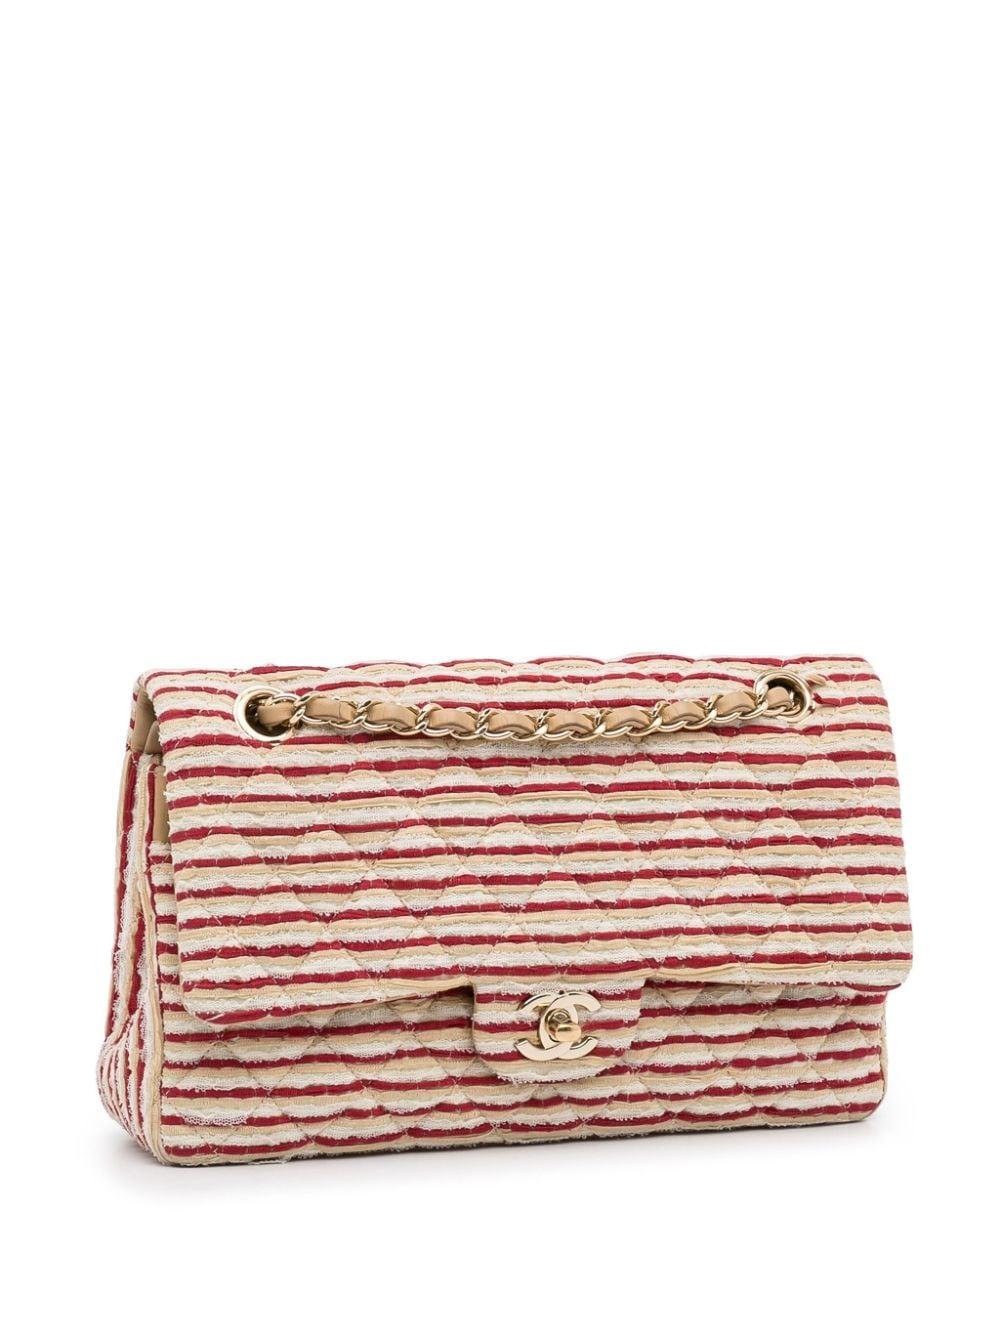 Women's Chanel Medium Classic Vintage Striped Red and Beige Double Flap Bag 